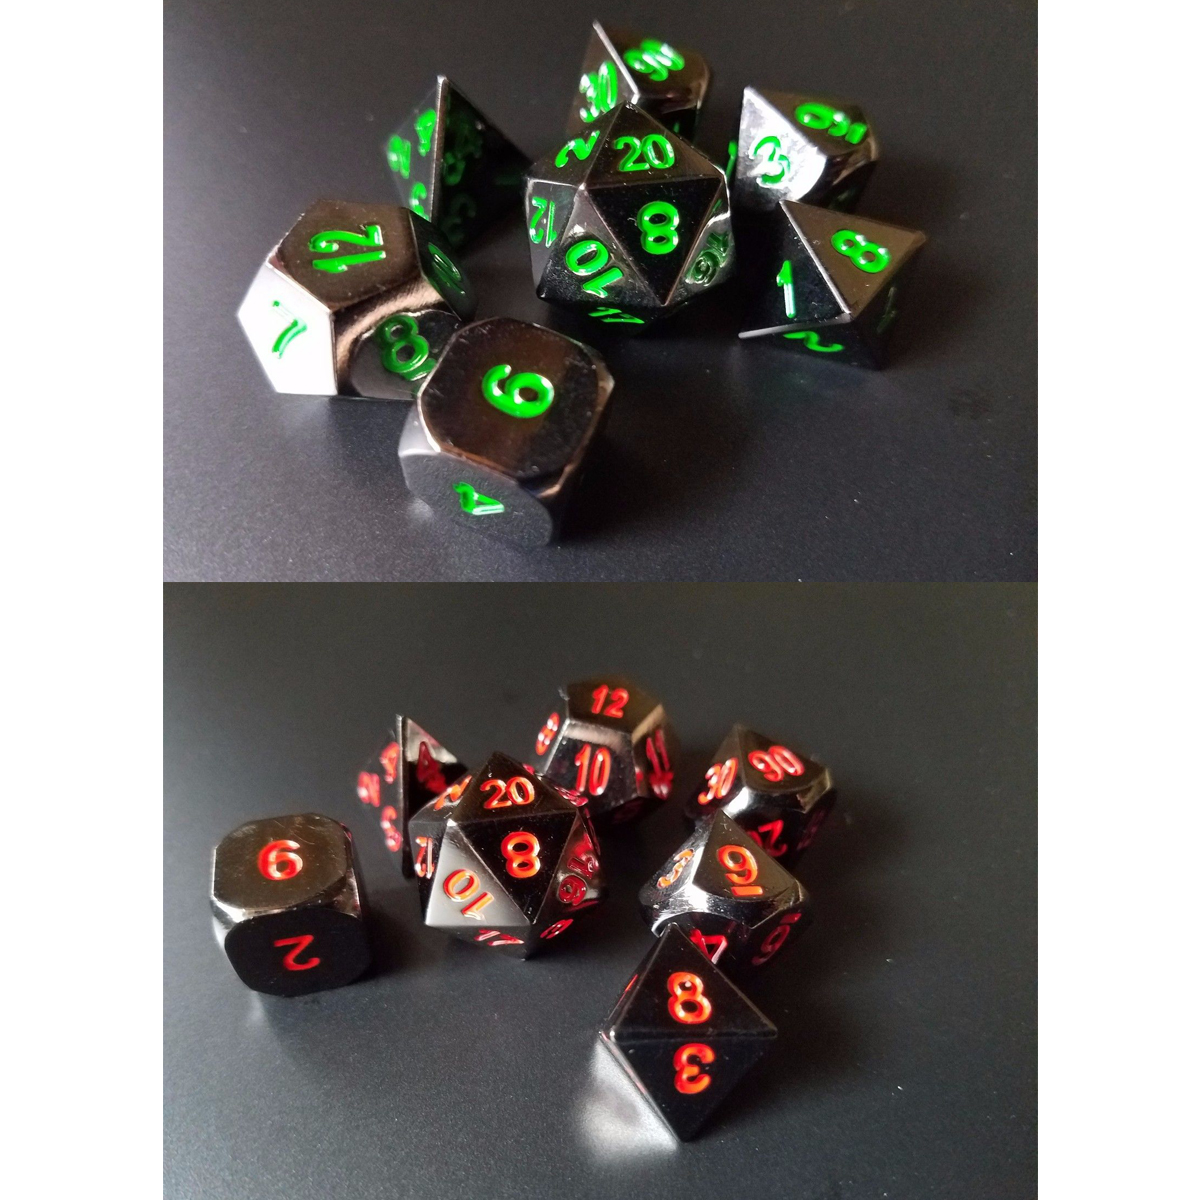 New-Metal-Polyhedral-Dice-with-Bag-Green-Red-7-Piece-Metal-Set-DnD-RPG-1239419-3